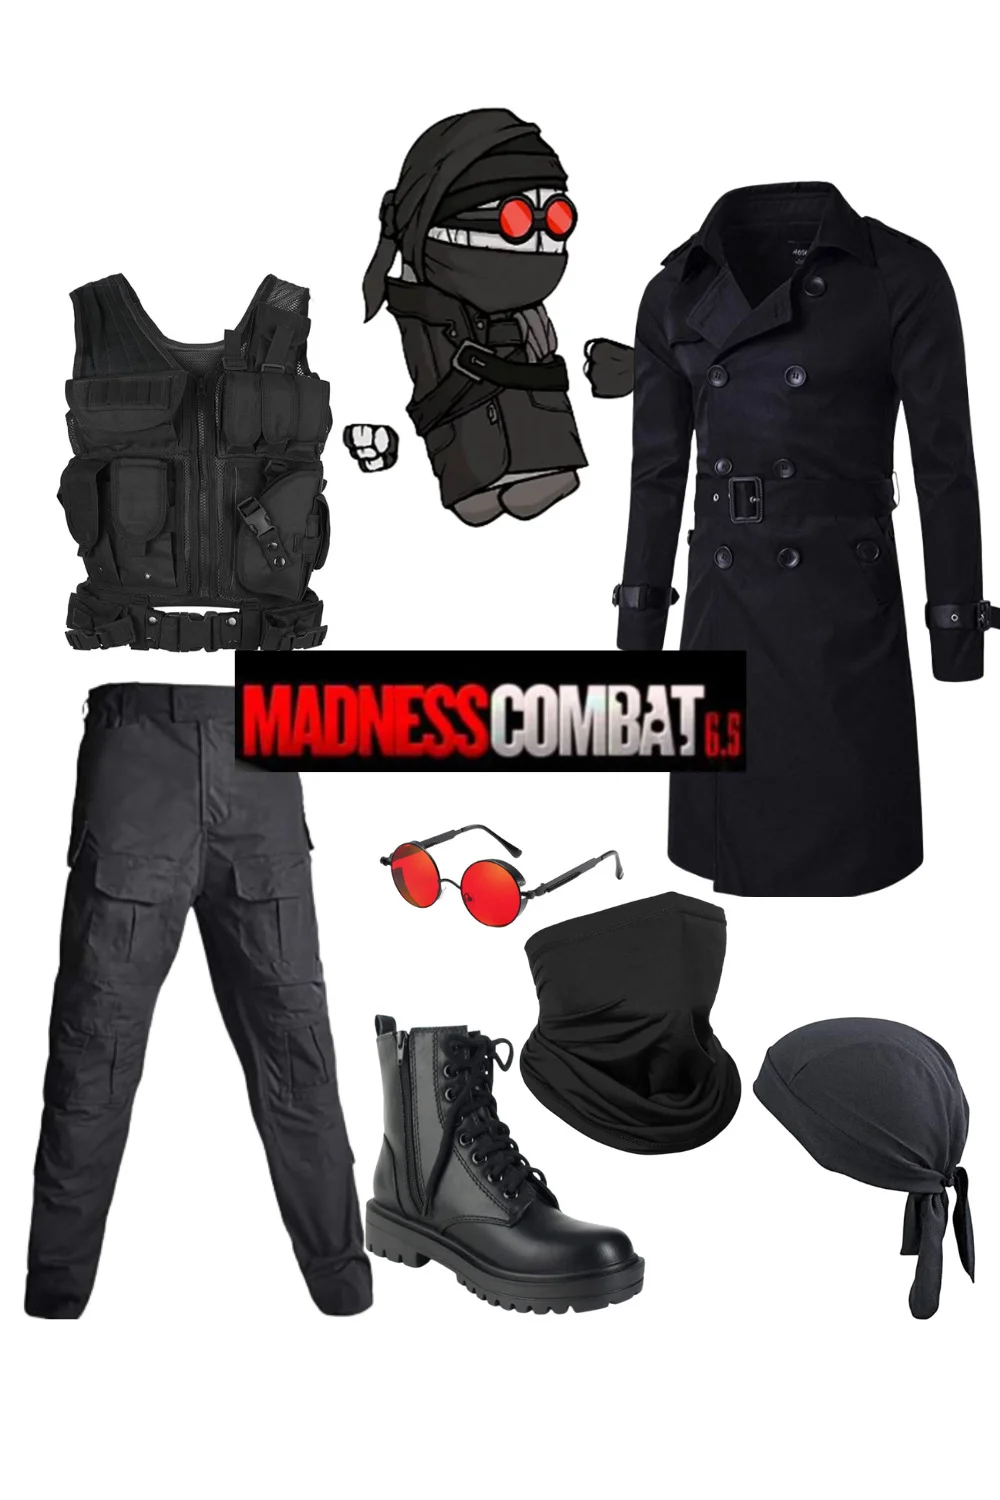 Madness Combat - Madness Team Cosplay:.: by ShadeTomlinson on